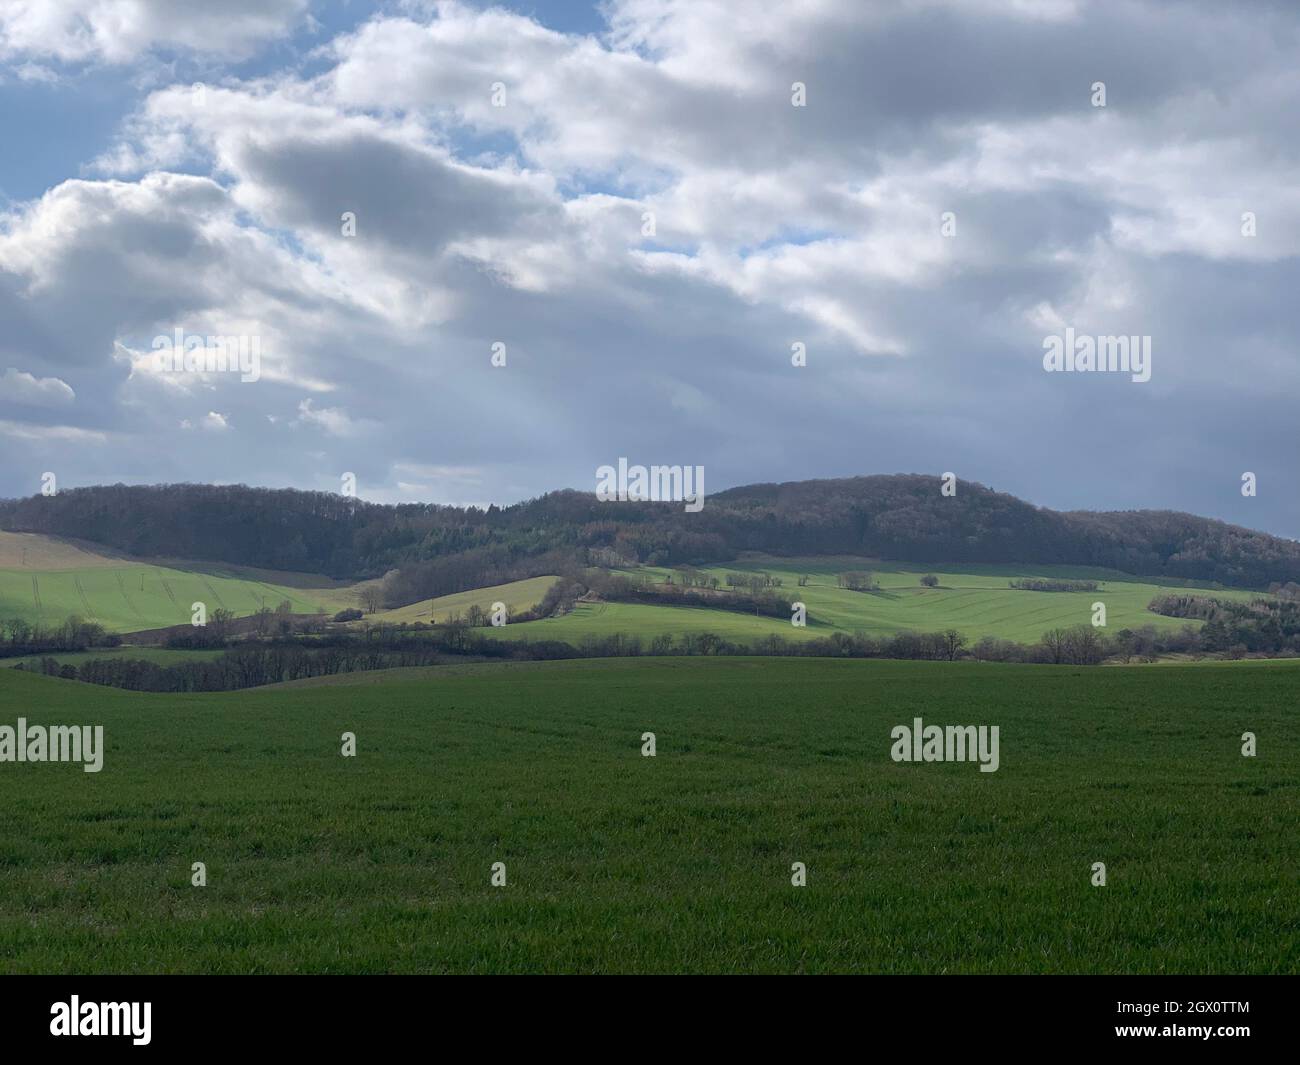 Scenic View Of Landscape Against Sky In Eichsfeld, Thuringia, Germany Stock Photo